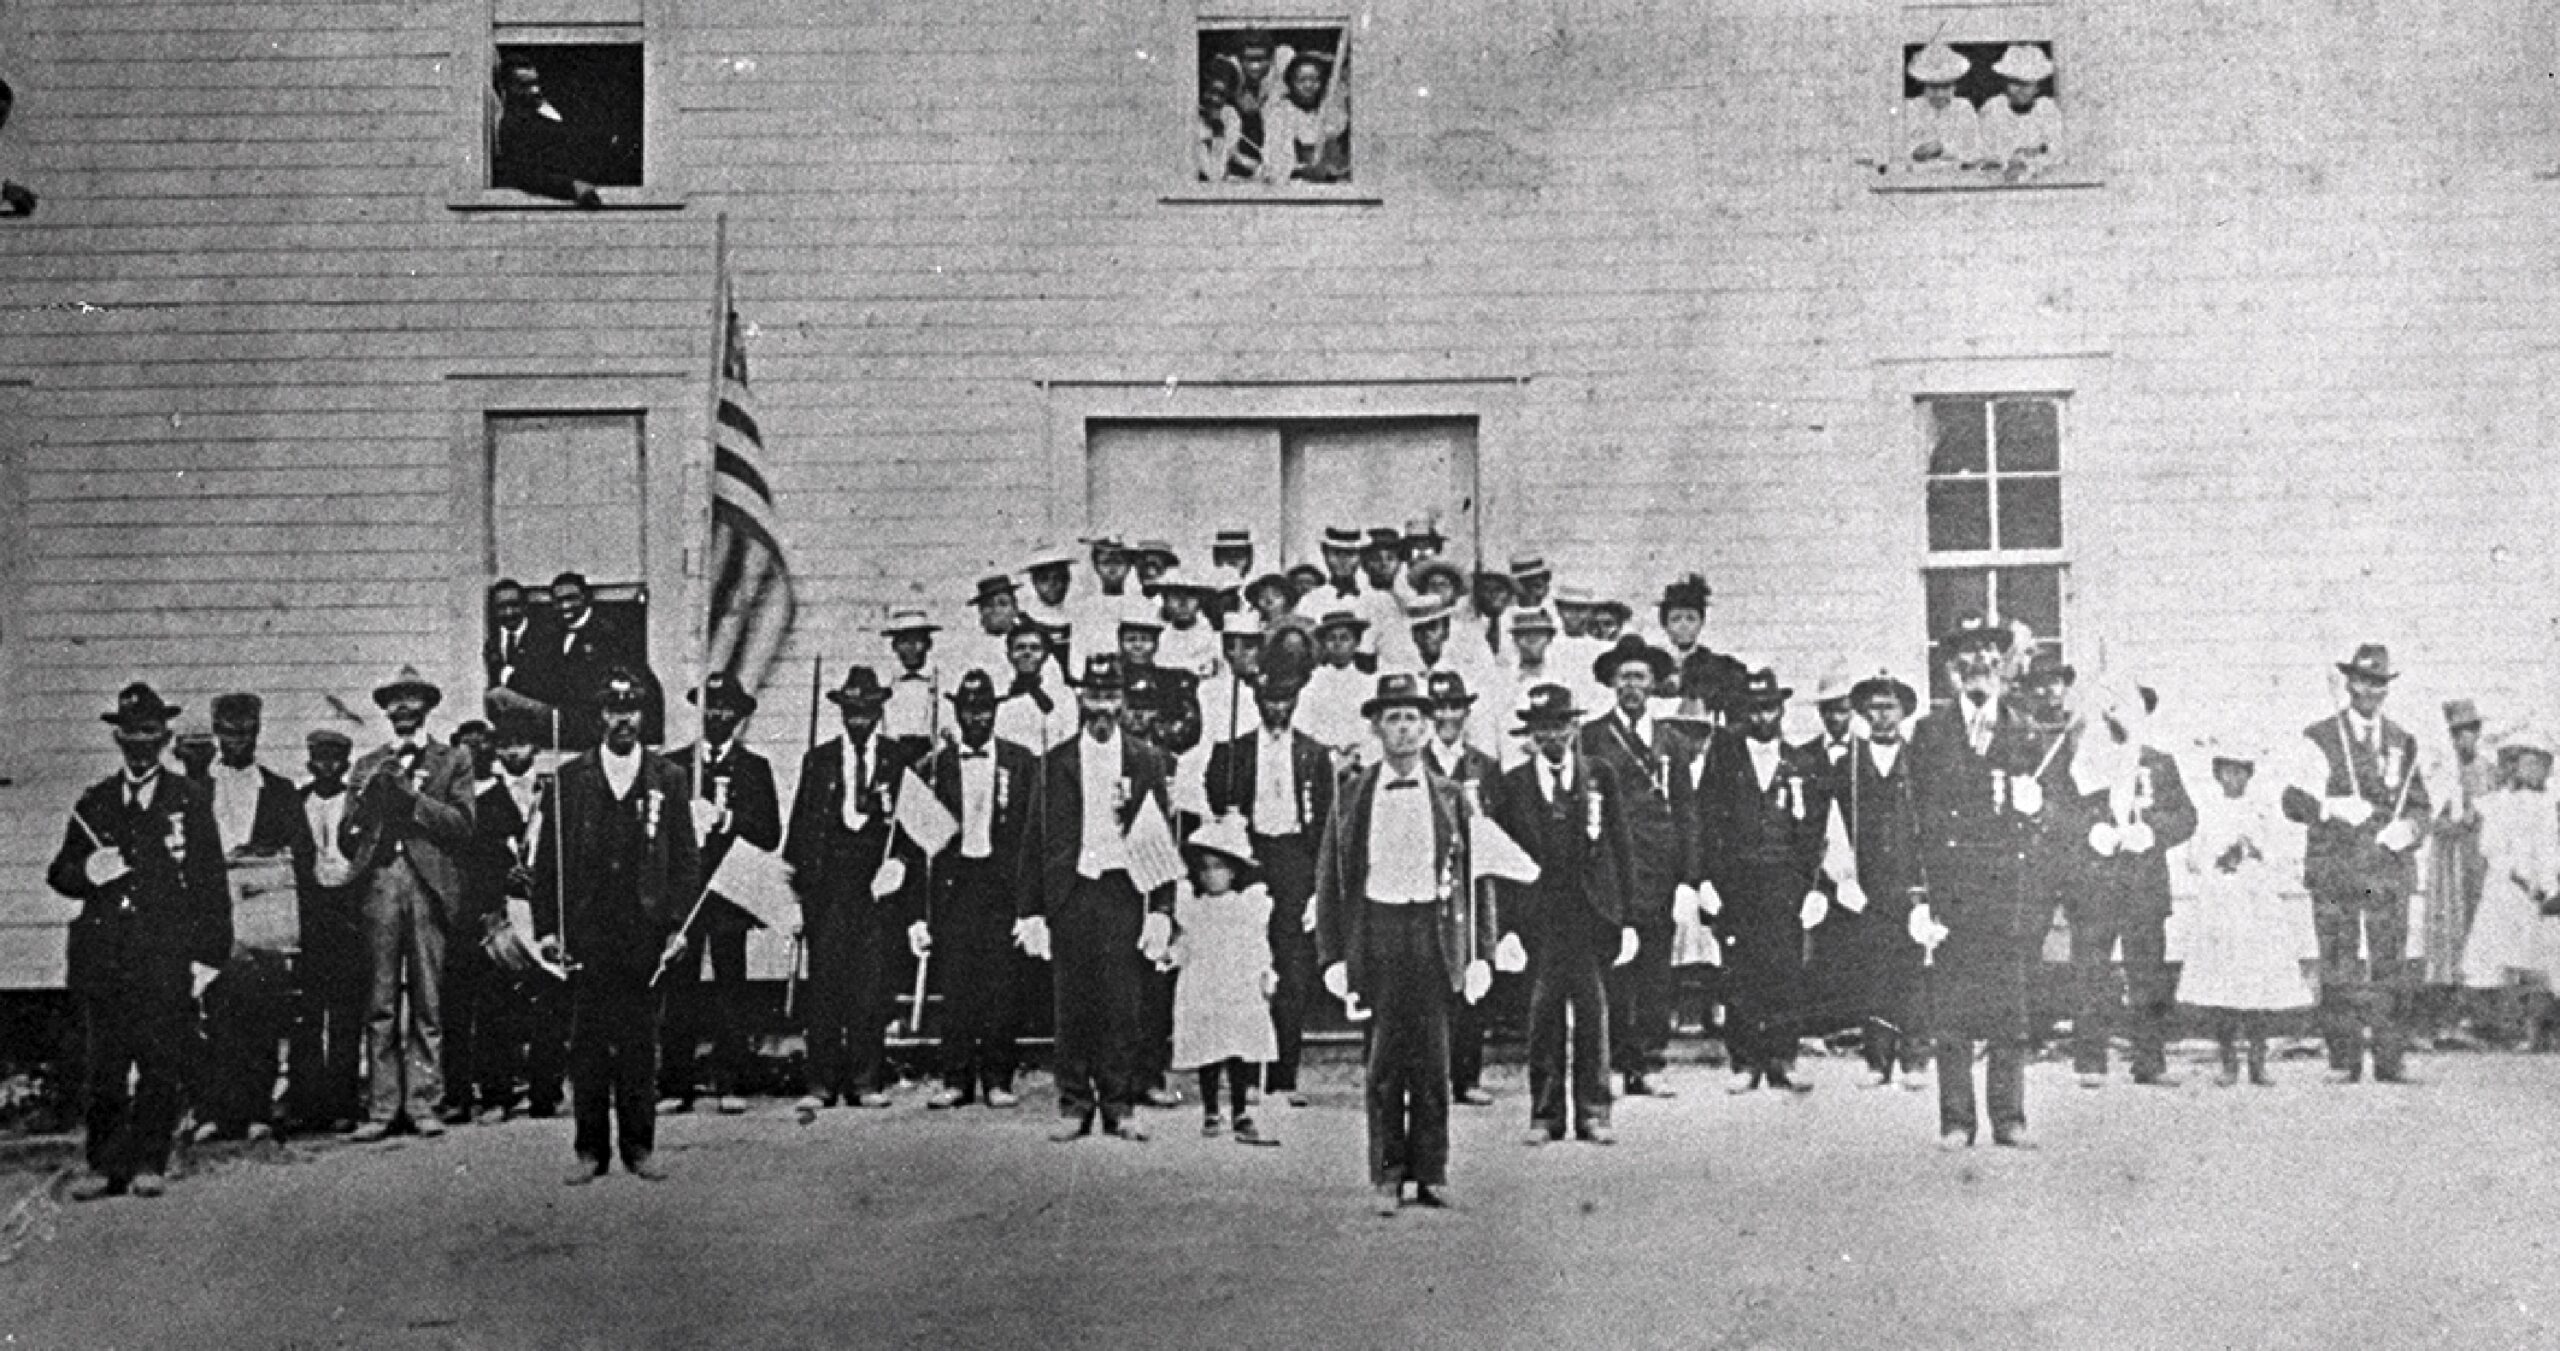 1902: 35th US Colored Troops Reunion
